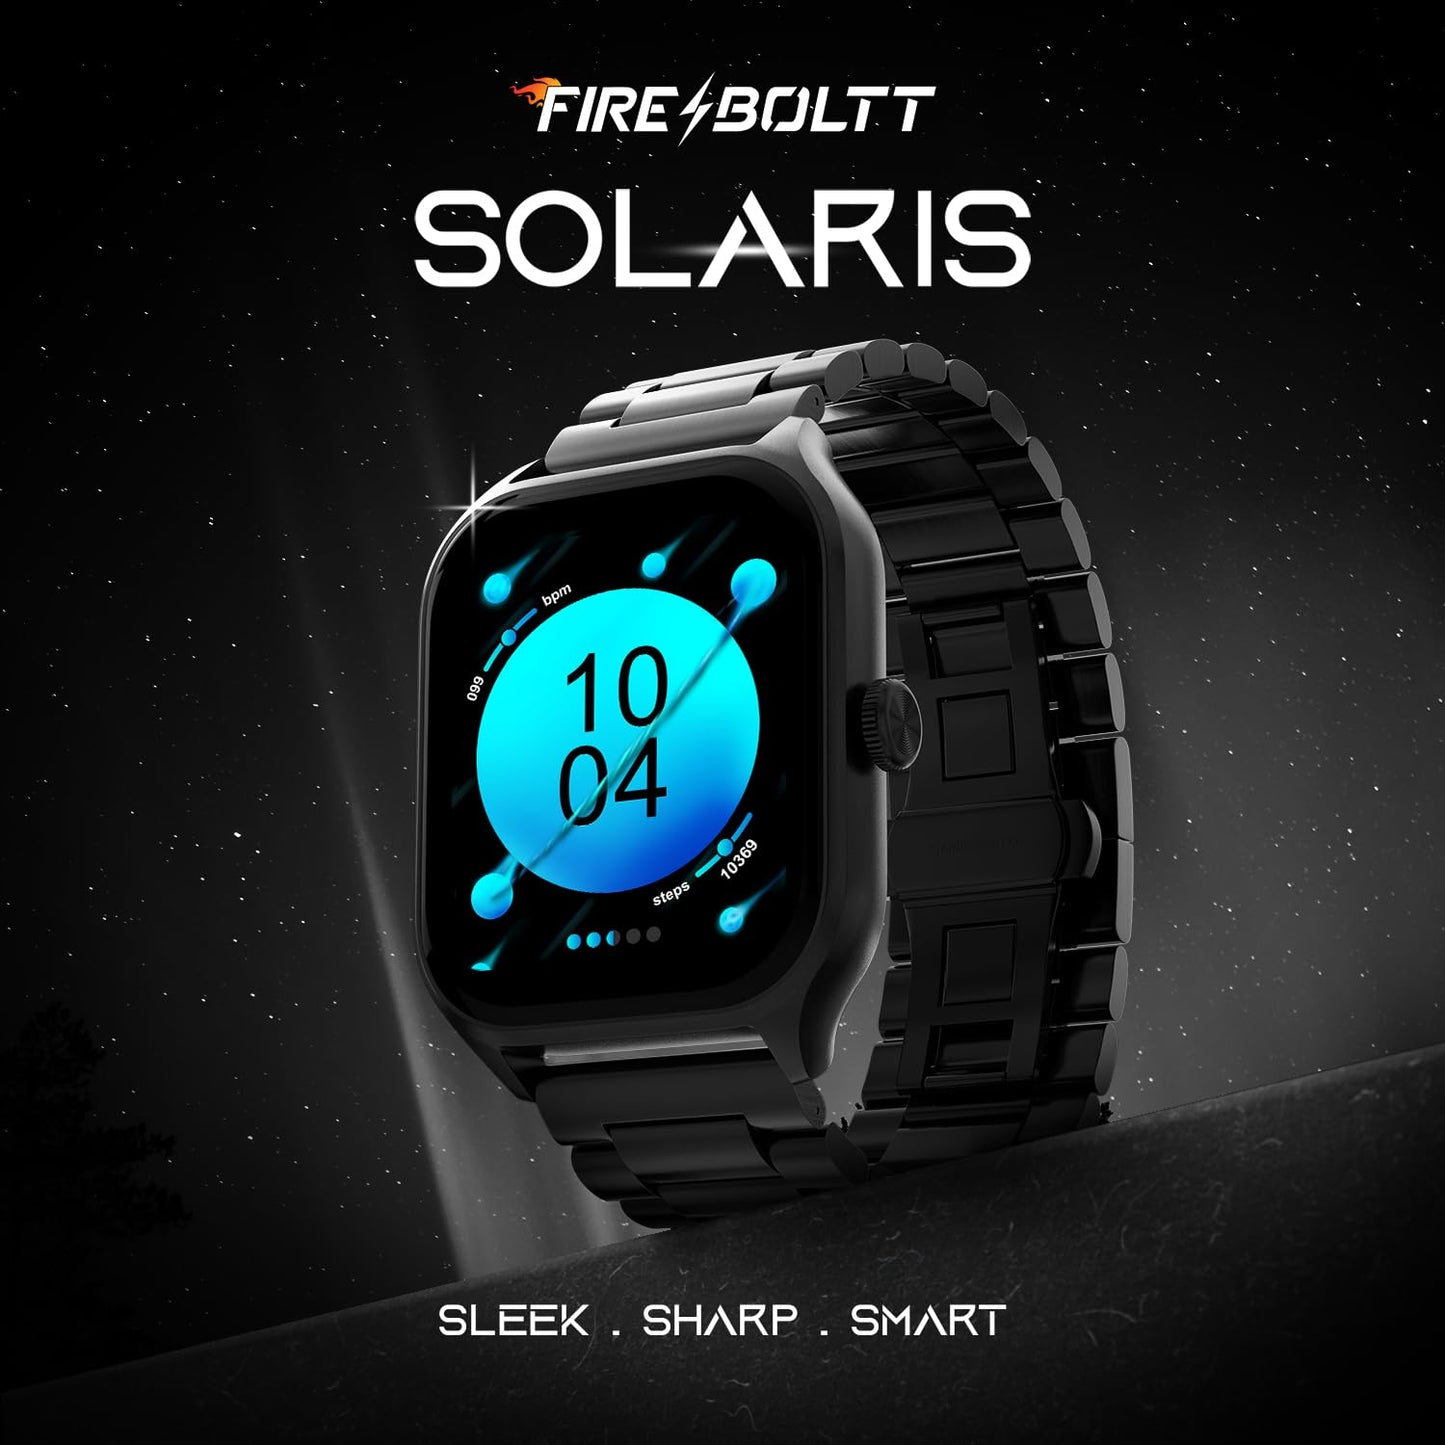 Fire-Boltt Solaris: 1.78” AMOLED Always-on Display with 368 * 448 px Resolution, 123 Sports Mode, IP68 Water-Resistant, Long-Lasting Battery Life and Comprehensive Health Tracking (Black)